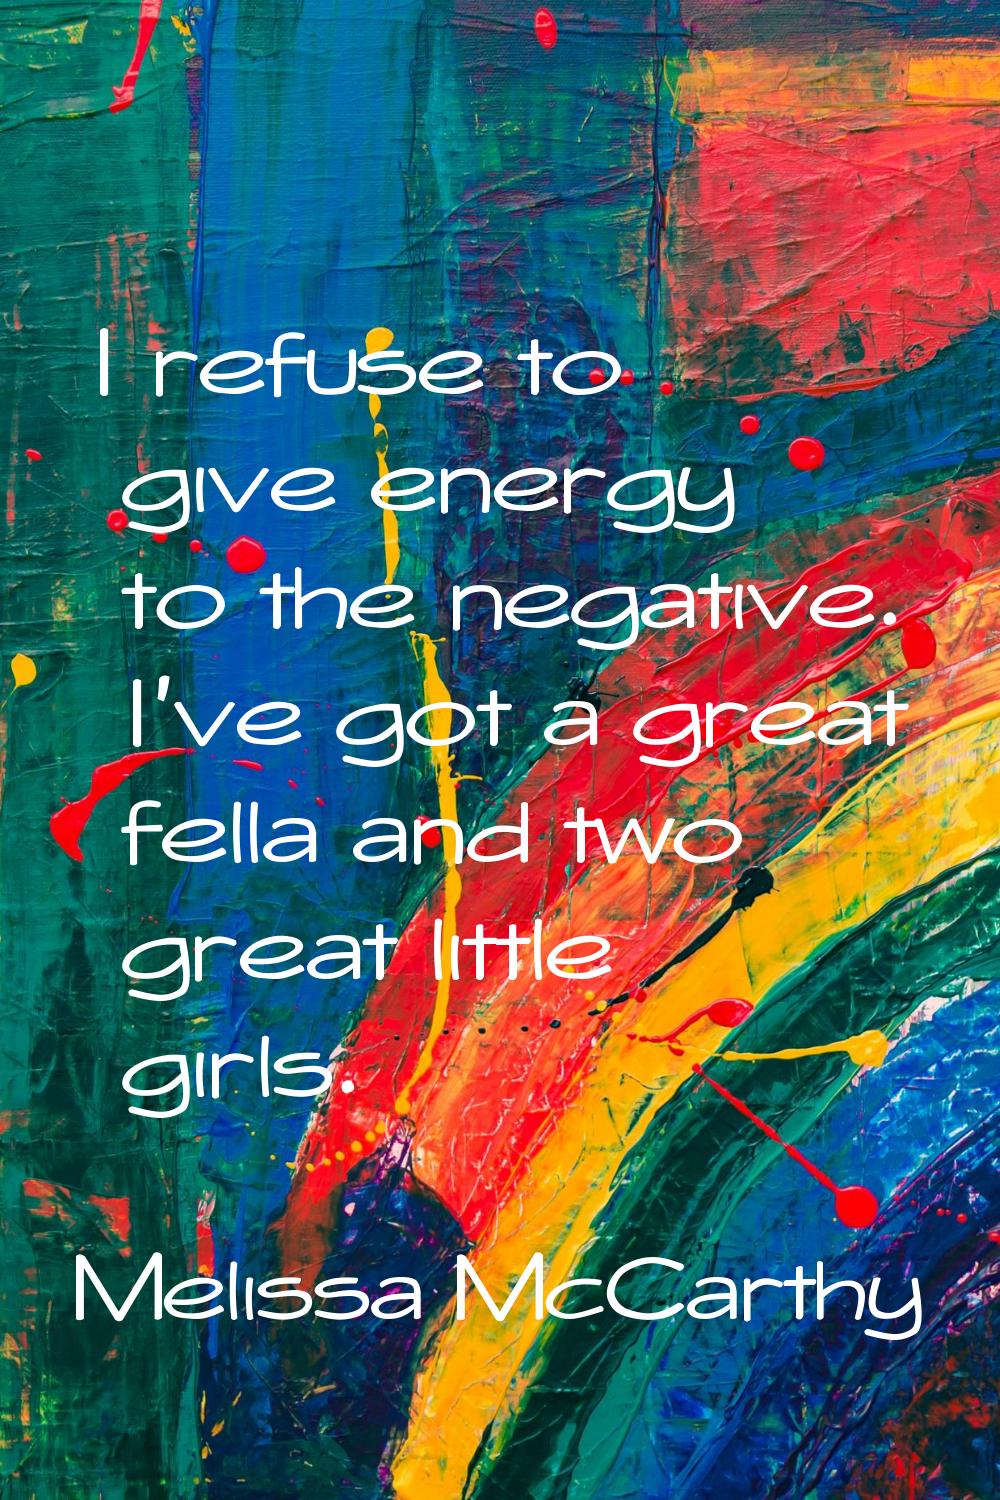 I refuse to give energy to the negative. I've got a great fella and two great little girls.